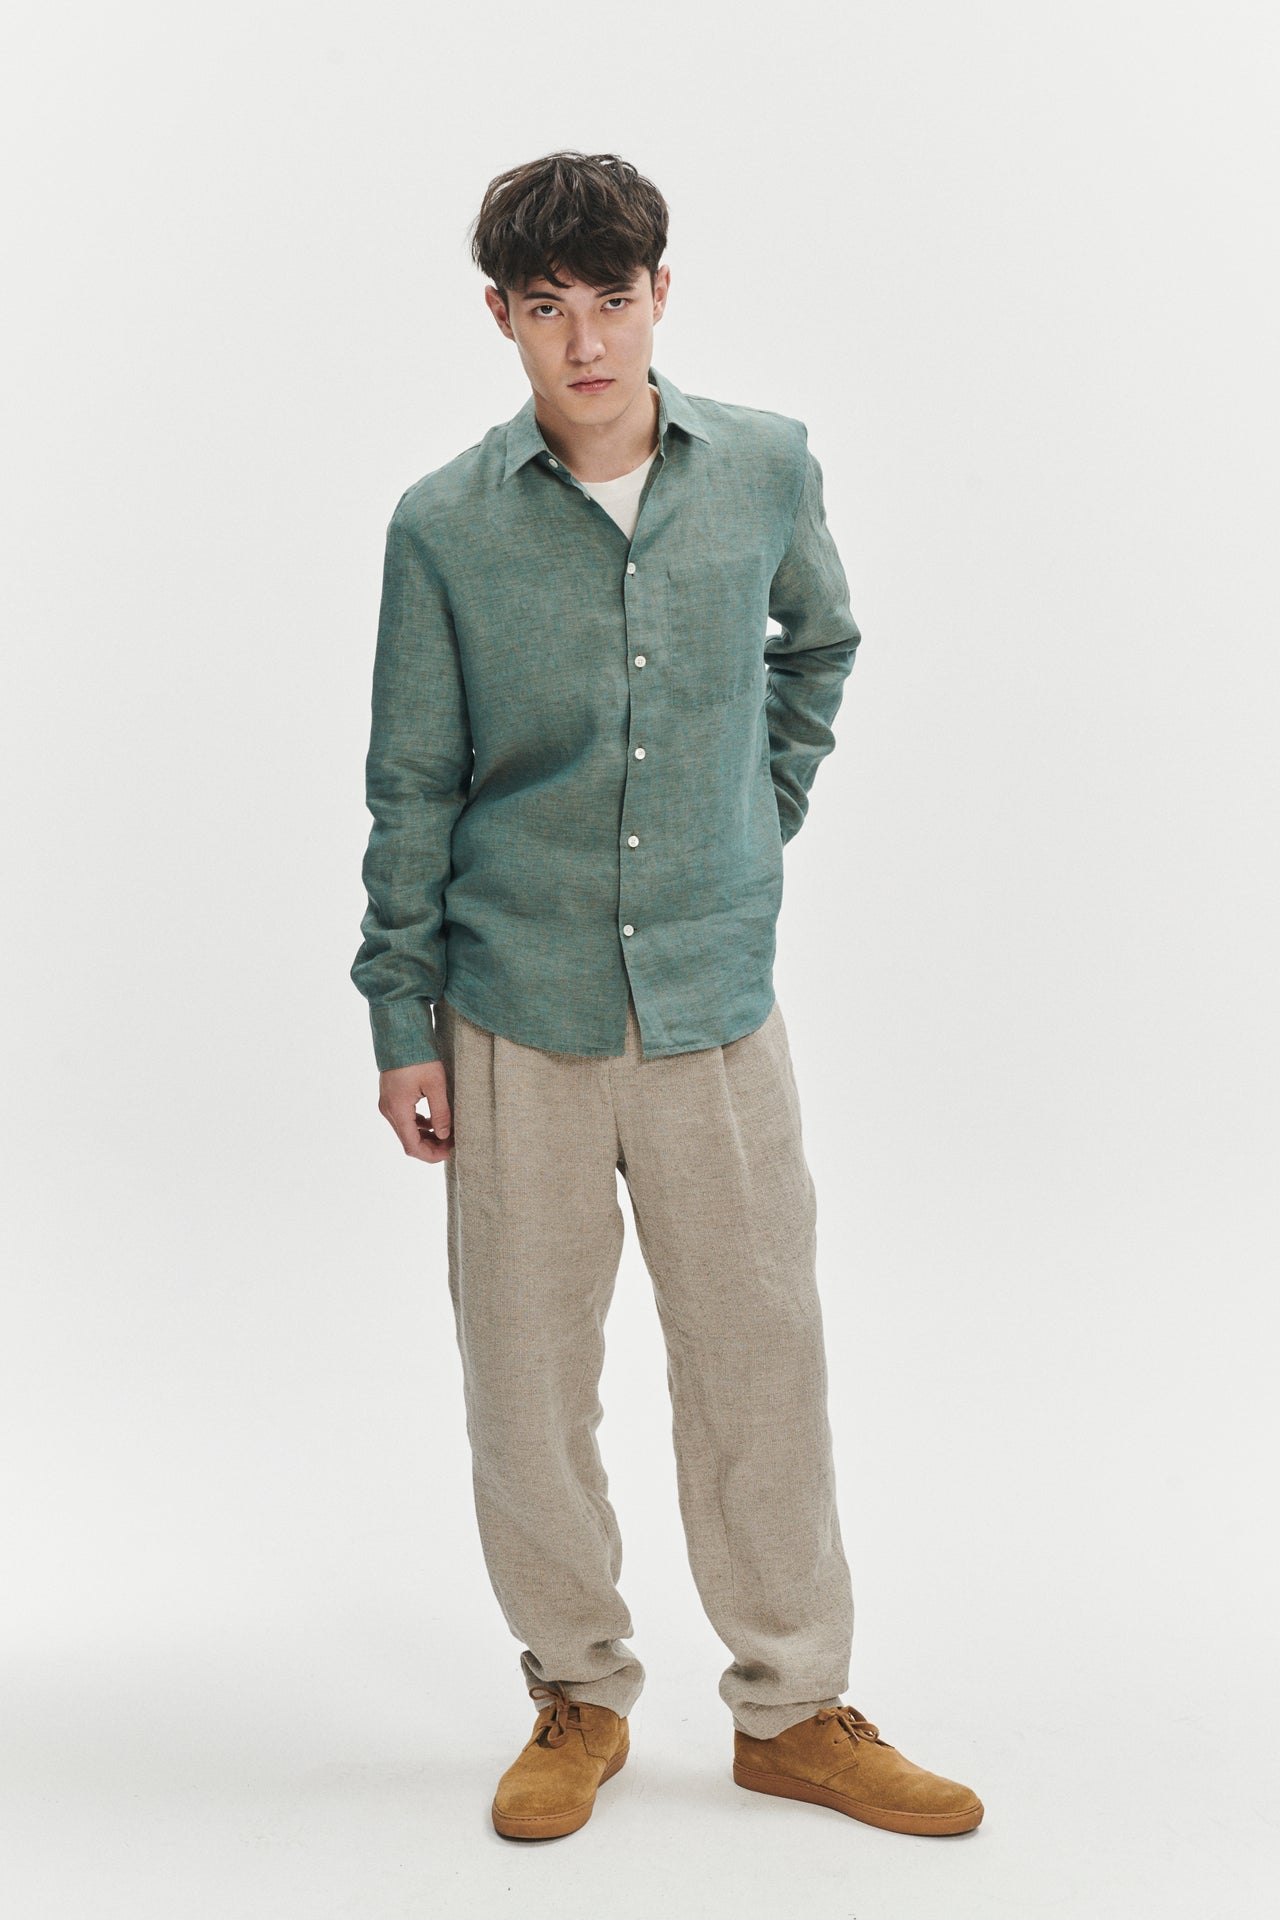 Feel Good Shirt in the Finest Green Delavé Portuguese Linen